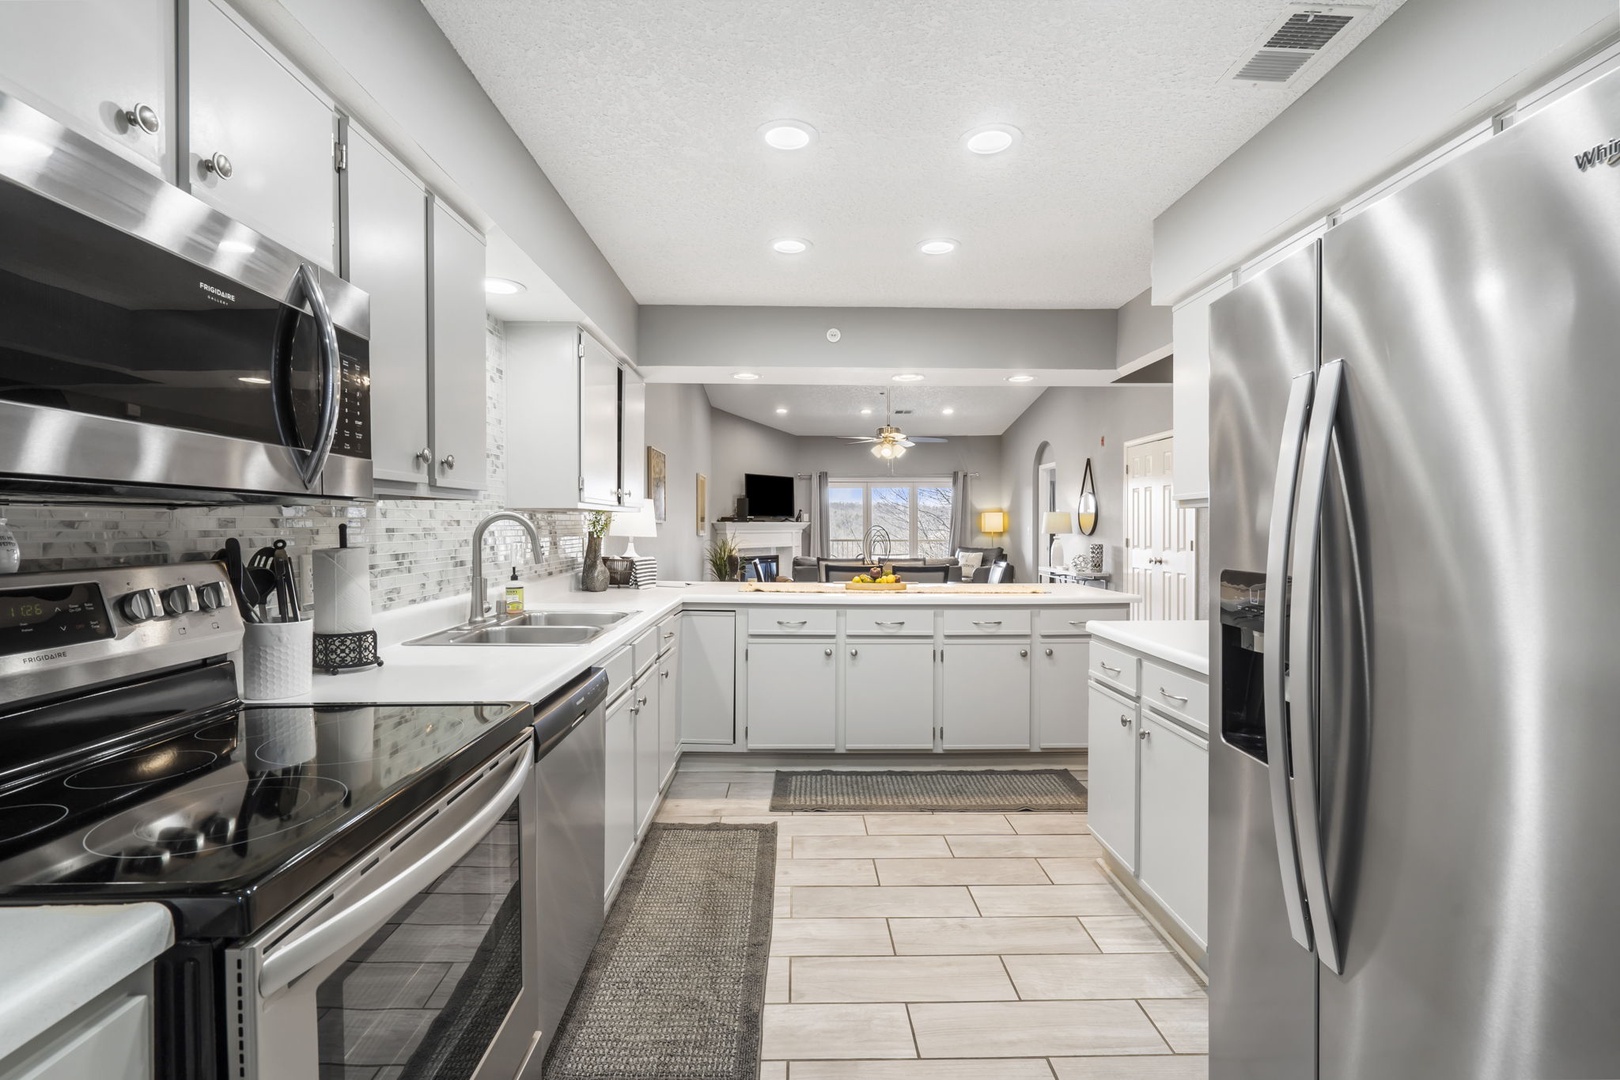 Unit 19: The sleek, updated kitchen is spacious & well-equipped for your visit